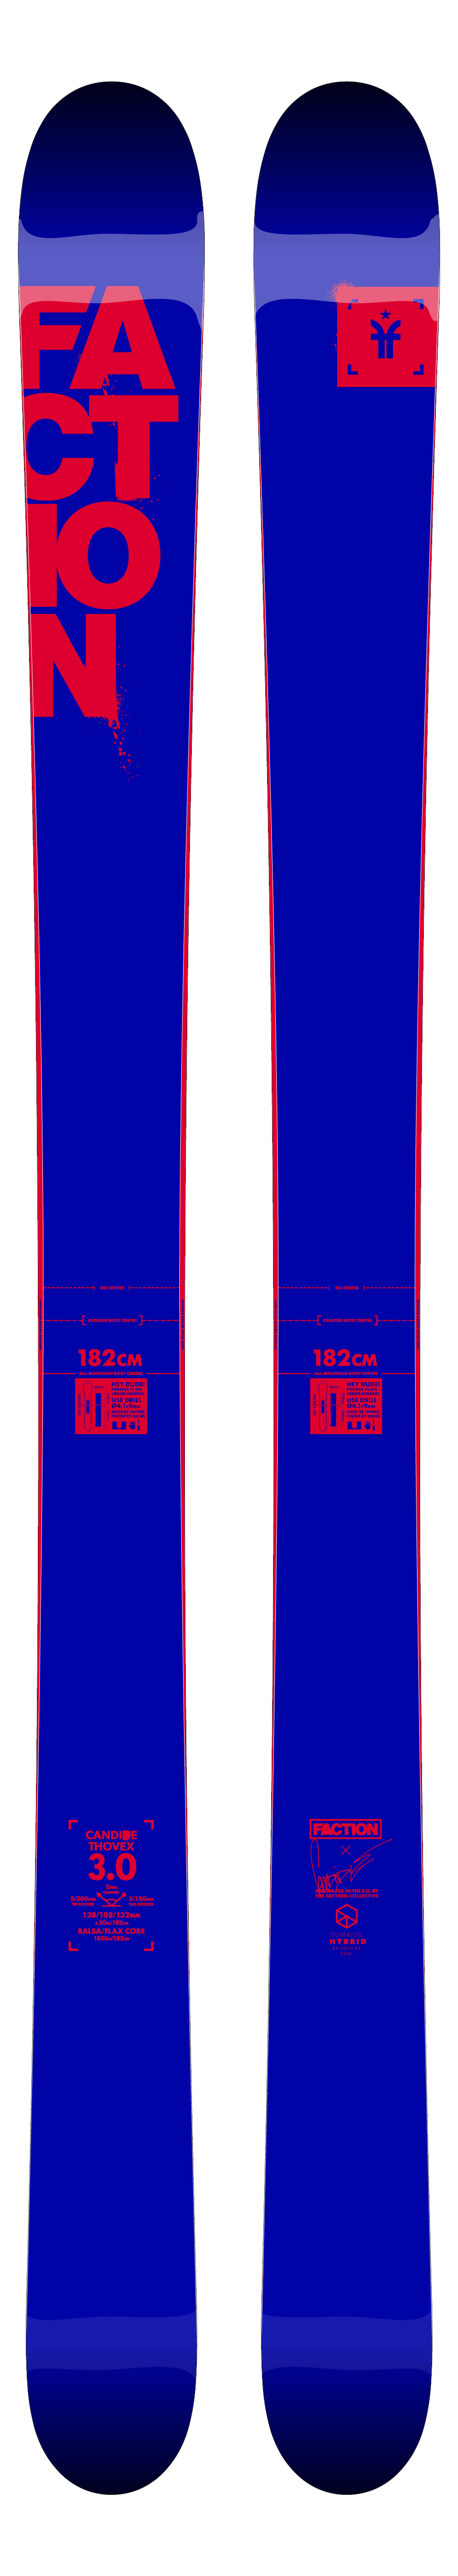 Faction Skis Candide 3.0, $980